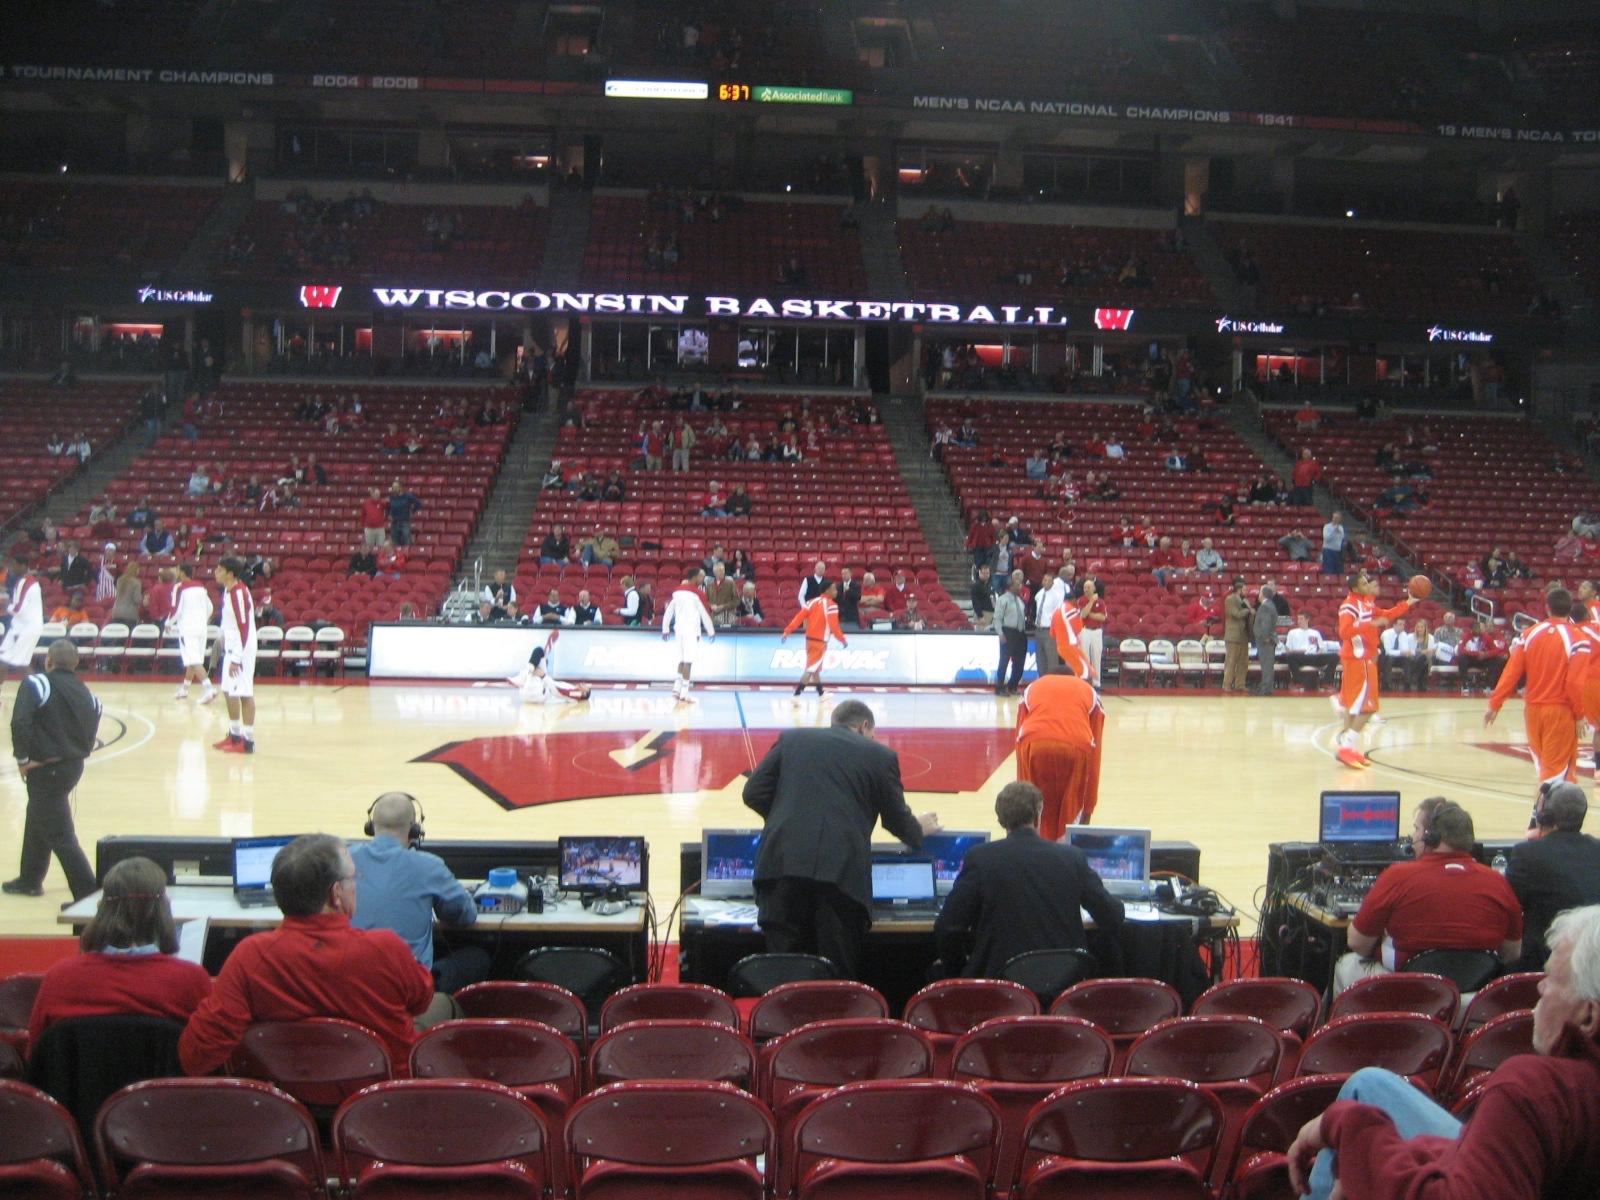 section 108, row c seat view  - kohl center